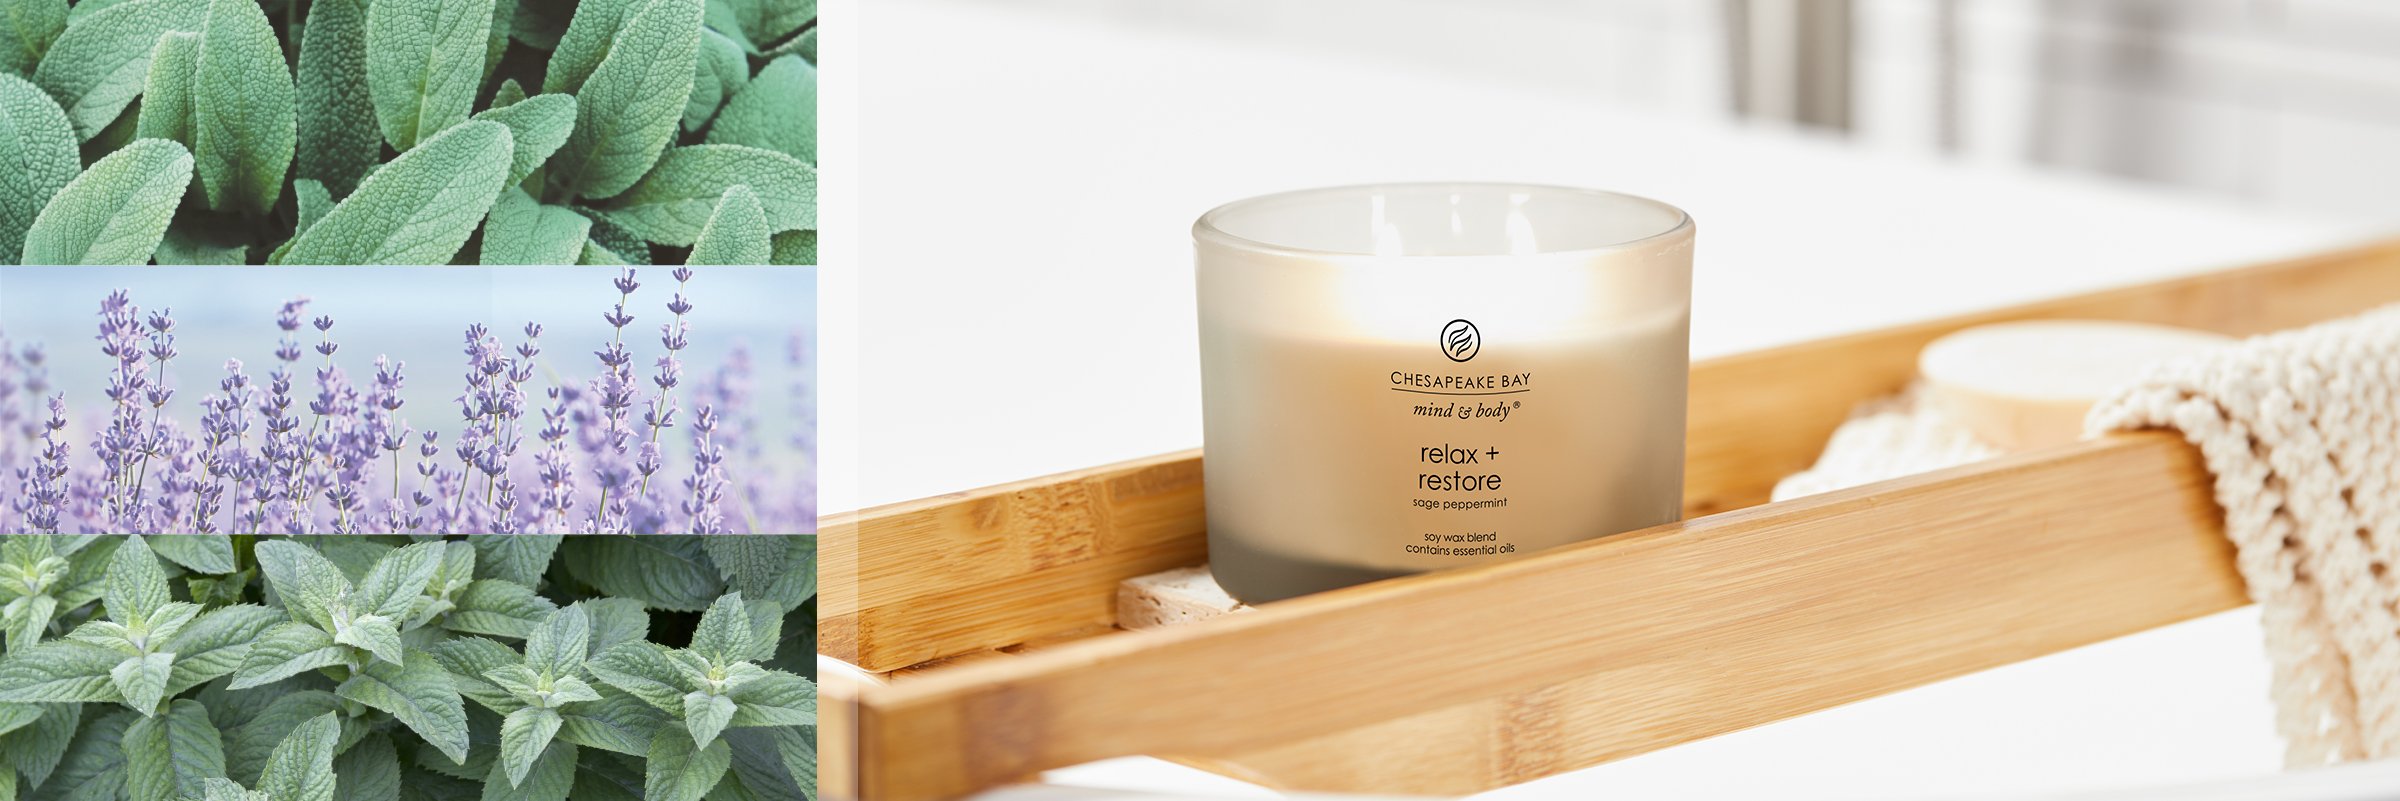 chesapeake bay candle relax and restore candle on bath shelf with fragrance ingredients